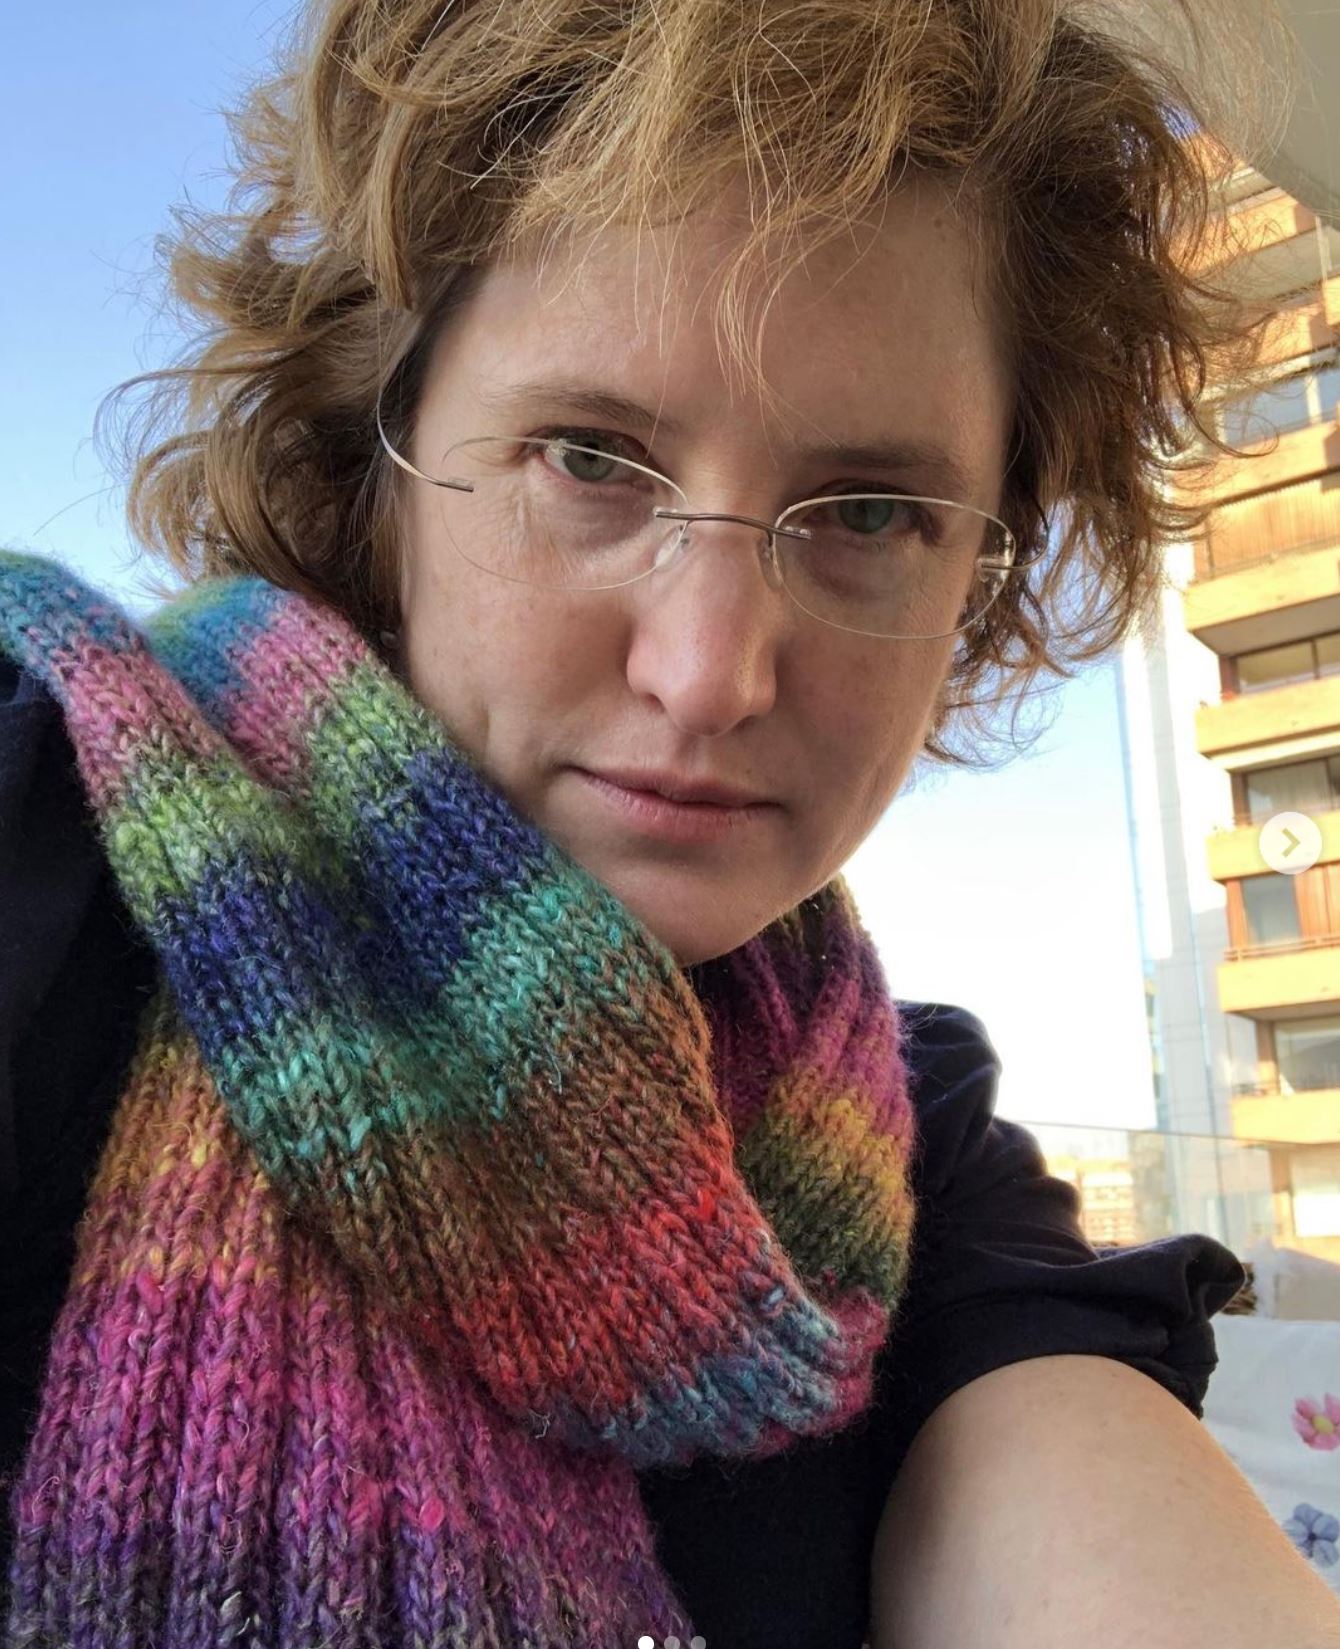 A woman looks down at the camera wearing a striped wool scarf